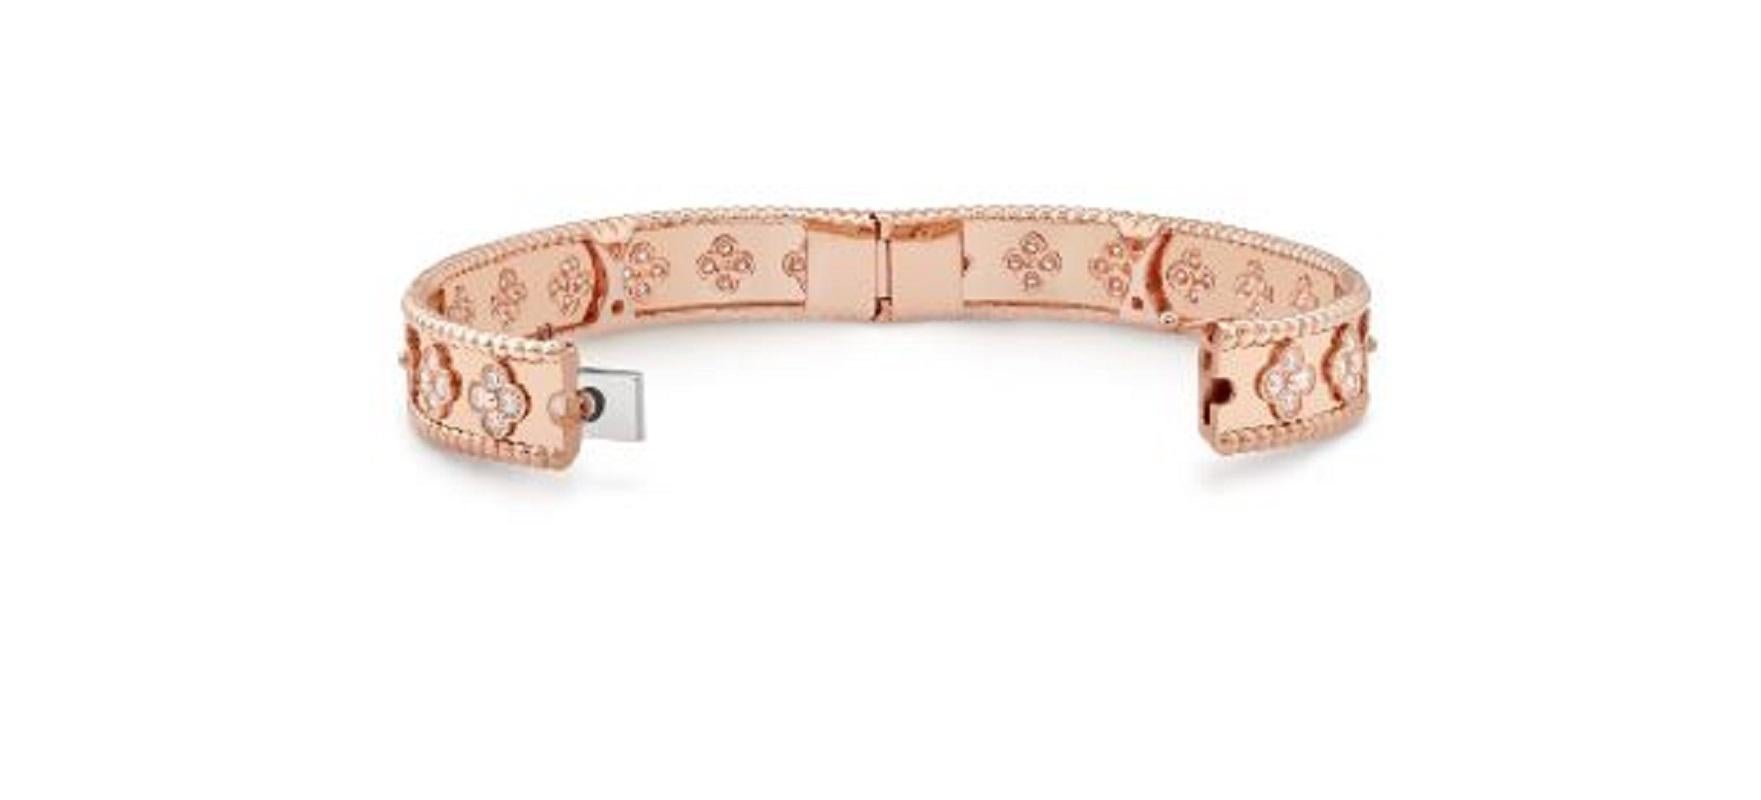 This classic bangle by Van Cleef & Arpels is an essential addition to any wrist stack. This luxurious piece is crafted in 18K rose gold with 1.78 carats of D-F color, IF-VVS clarity round diamonds. It is size extra small, which fits a wrist of